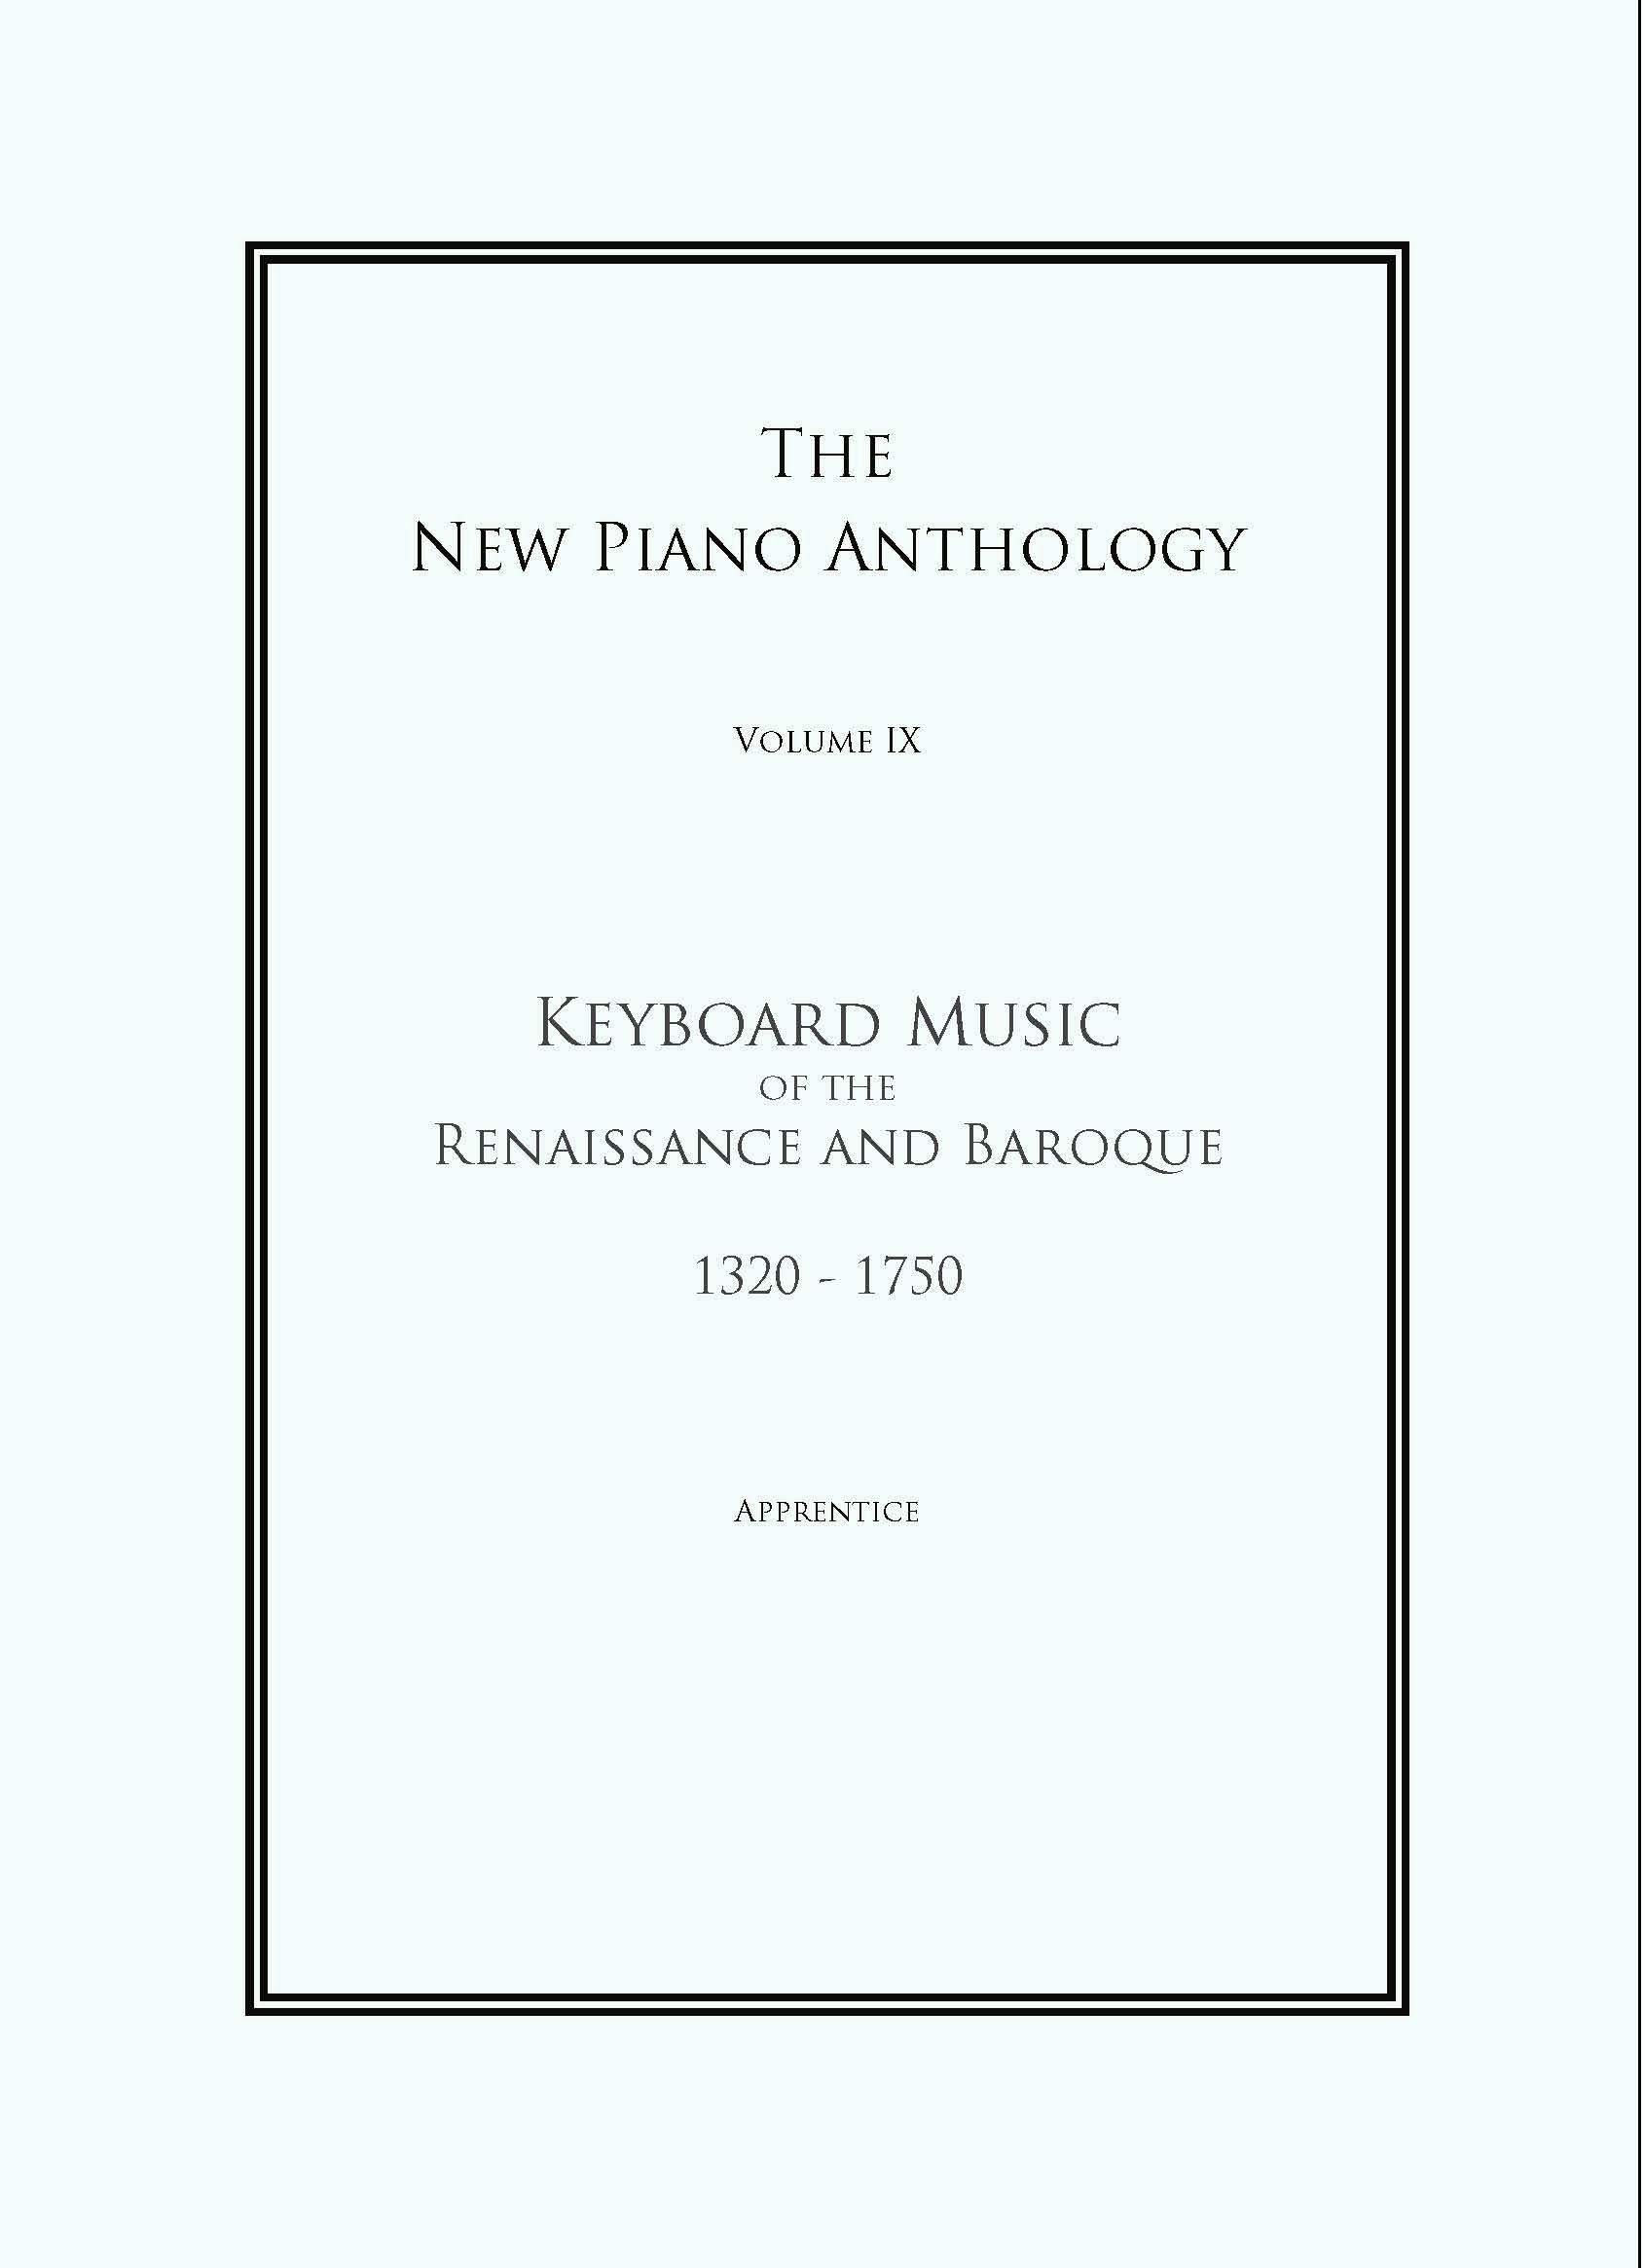 Keyboard Music of the Renaissance and Baroque (Proficient)